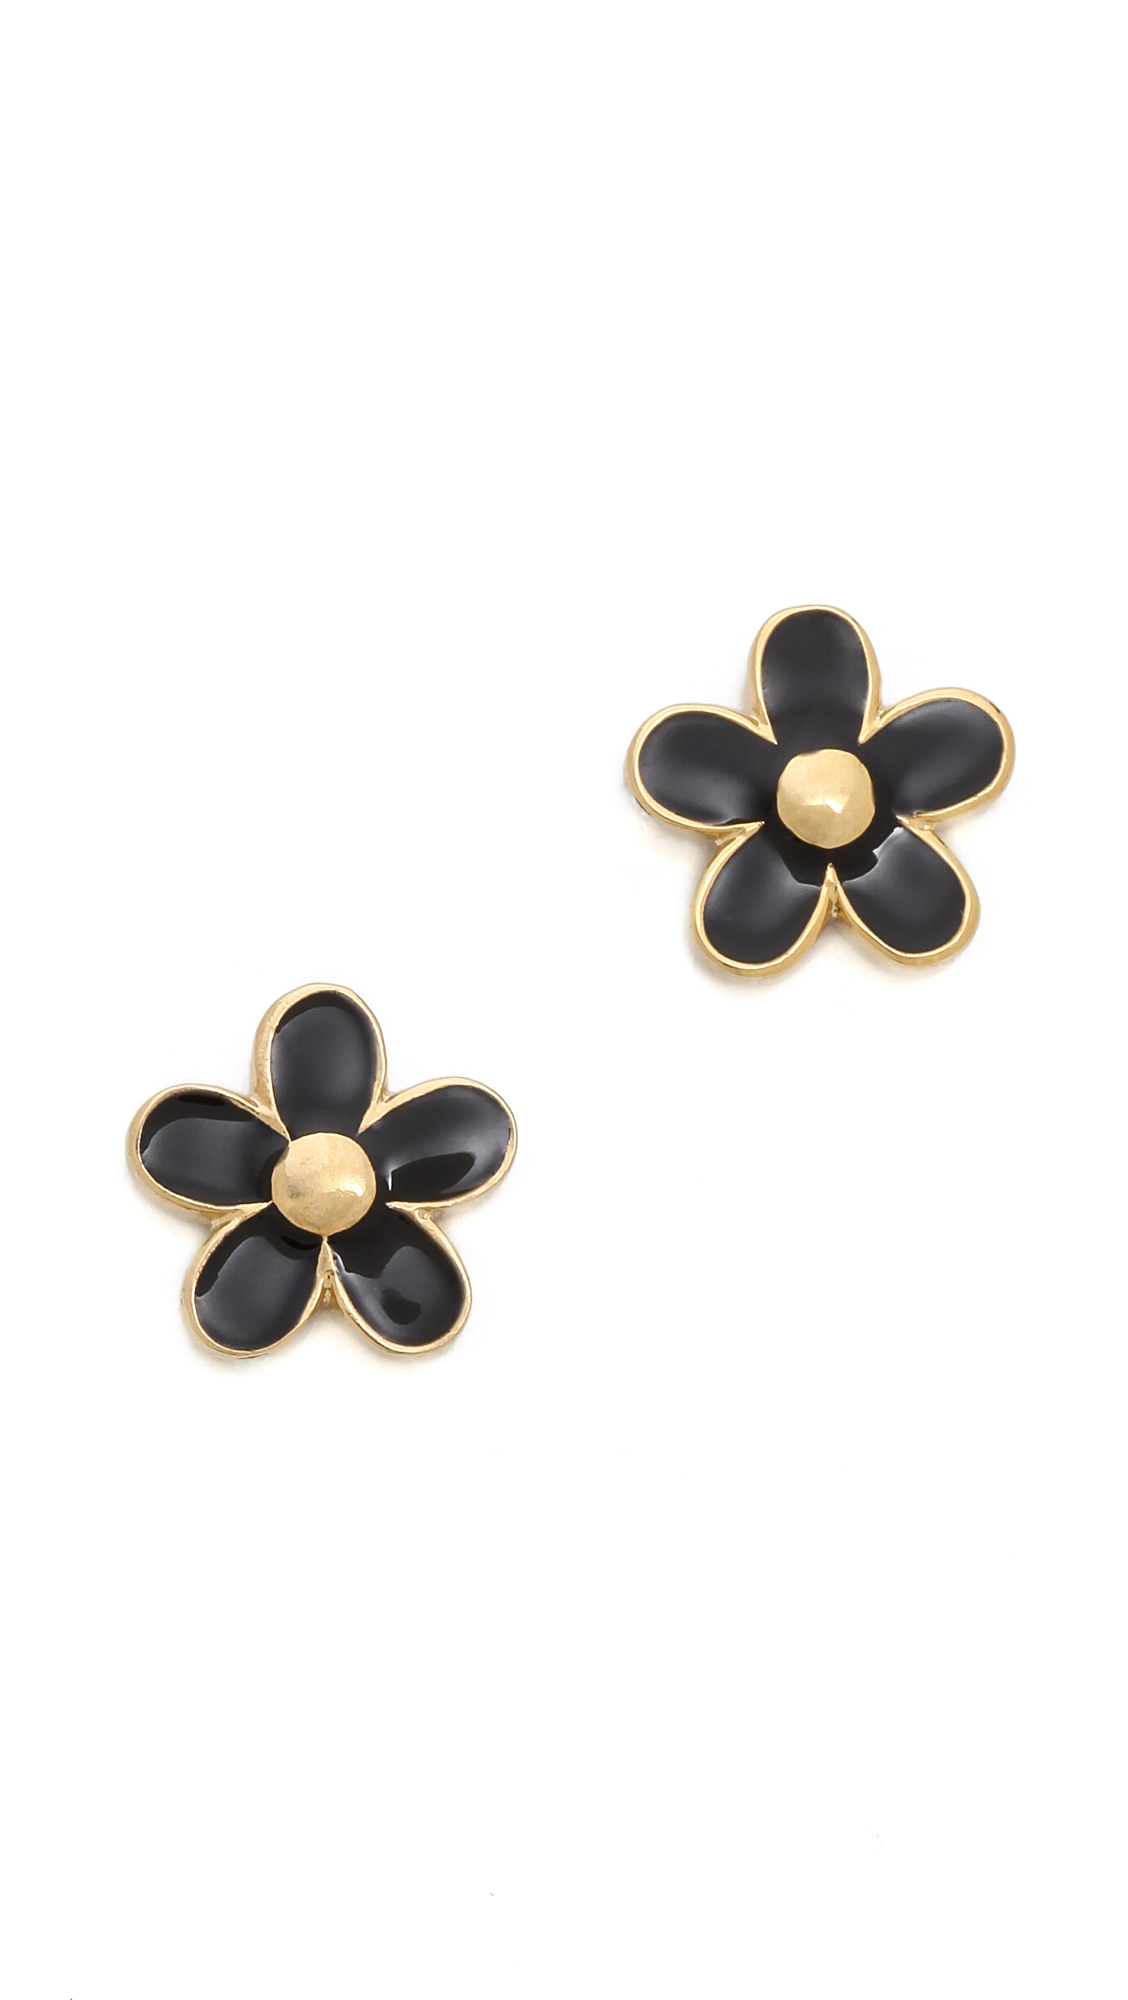 marc by marc jacobs black oro daisy stud earrings cream oro black product 0 965378642 normal